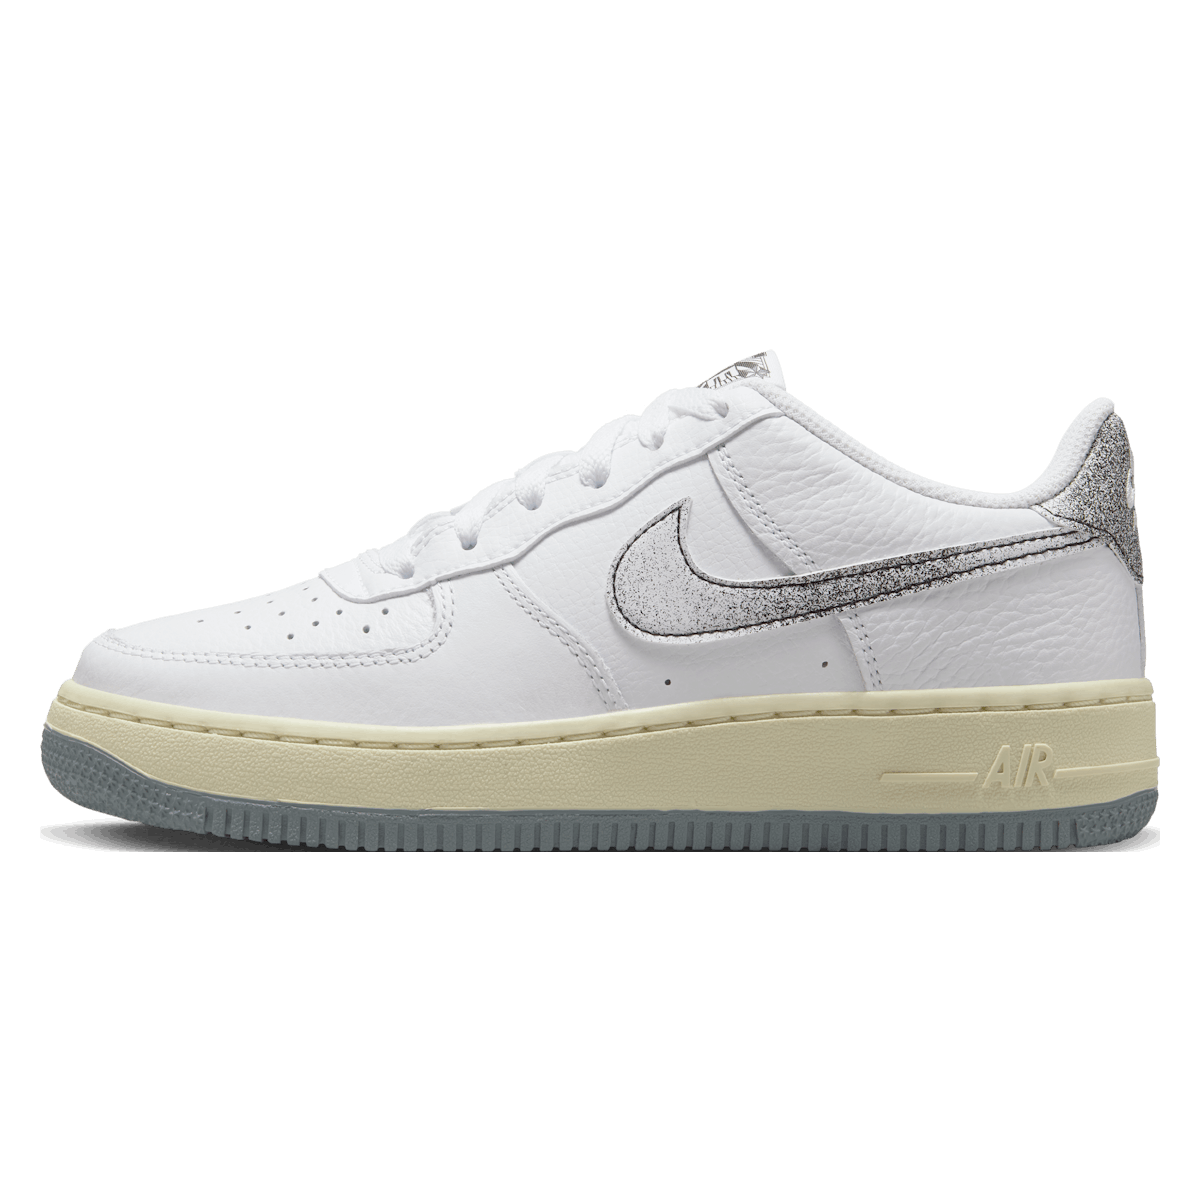 Nike Air Force 1 LV8 3 GS "50 Years of Hip-Hop"